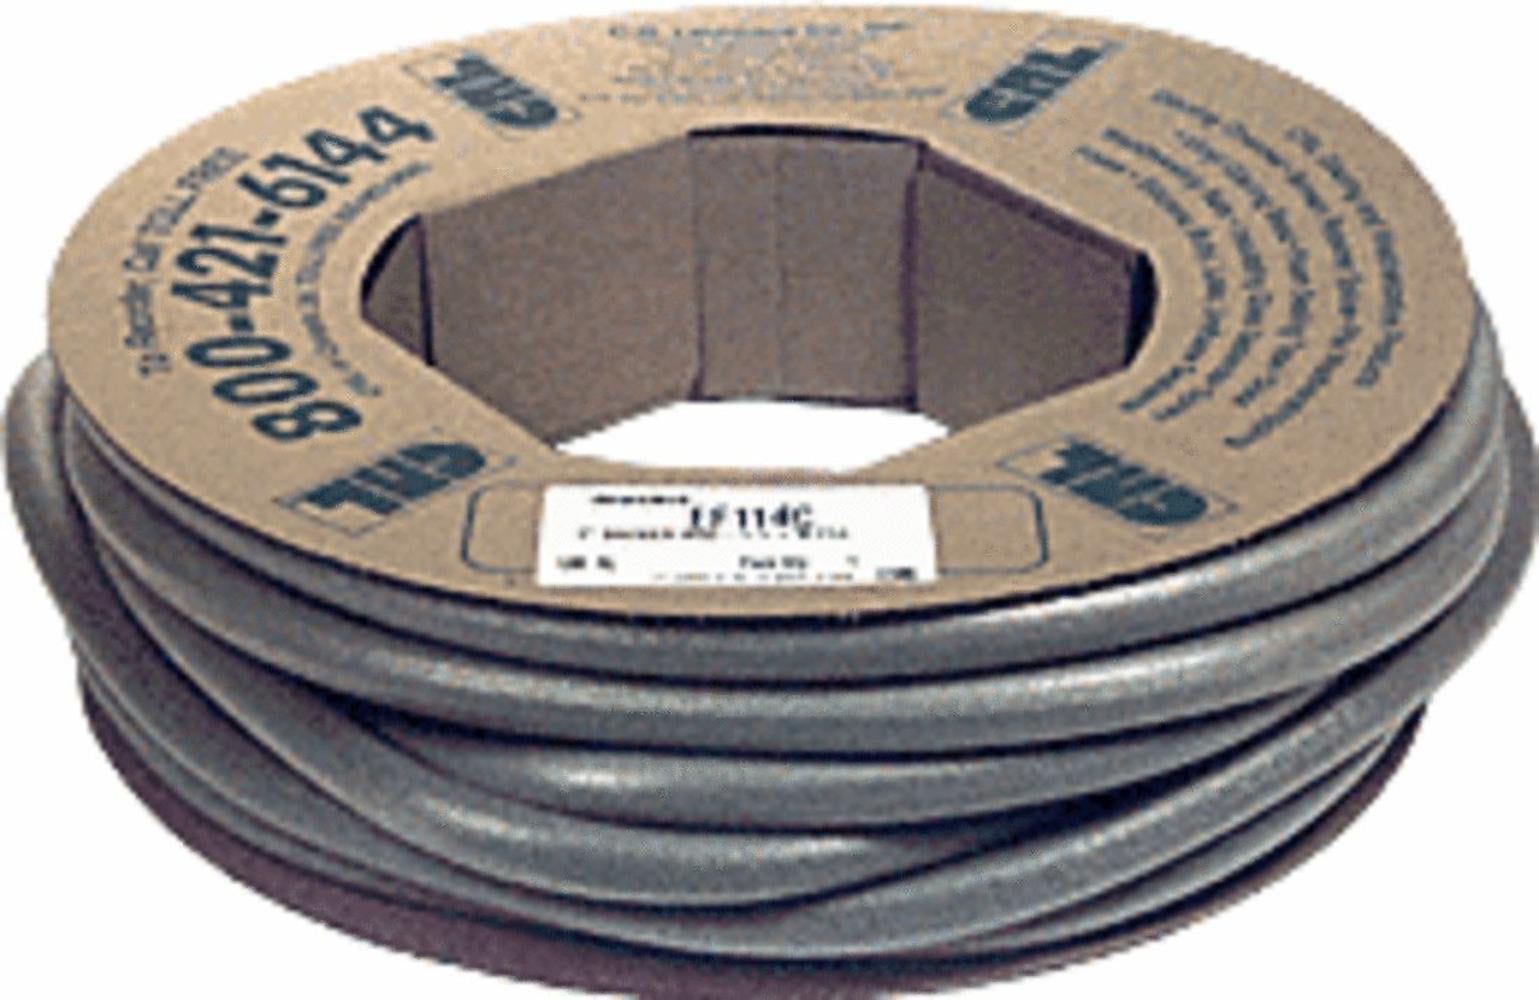 CRL 11/4" Closed Cell Backer Rod 100' Roll by, Allows Easy Control of Sealant Application